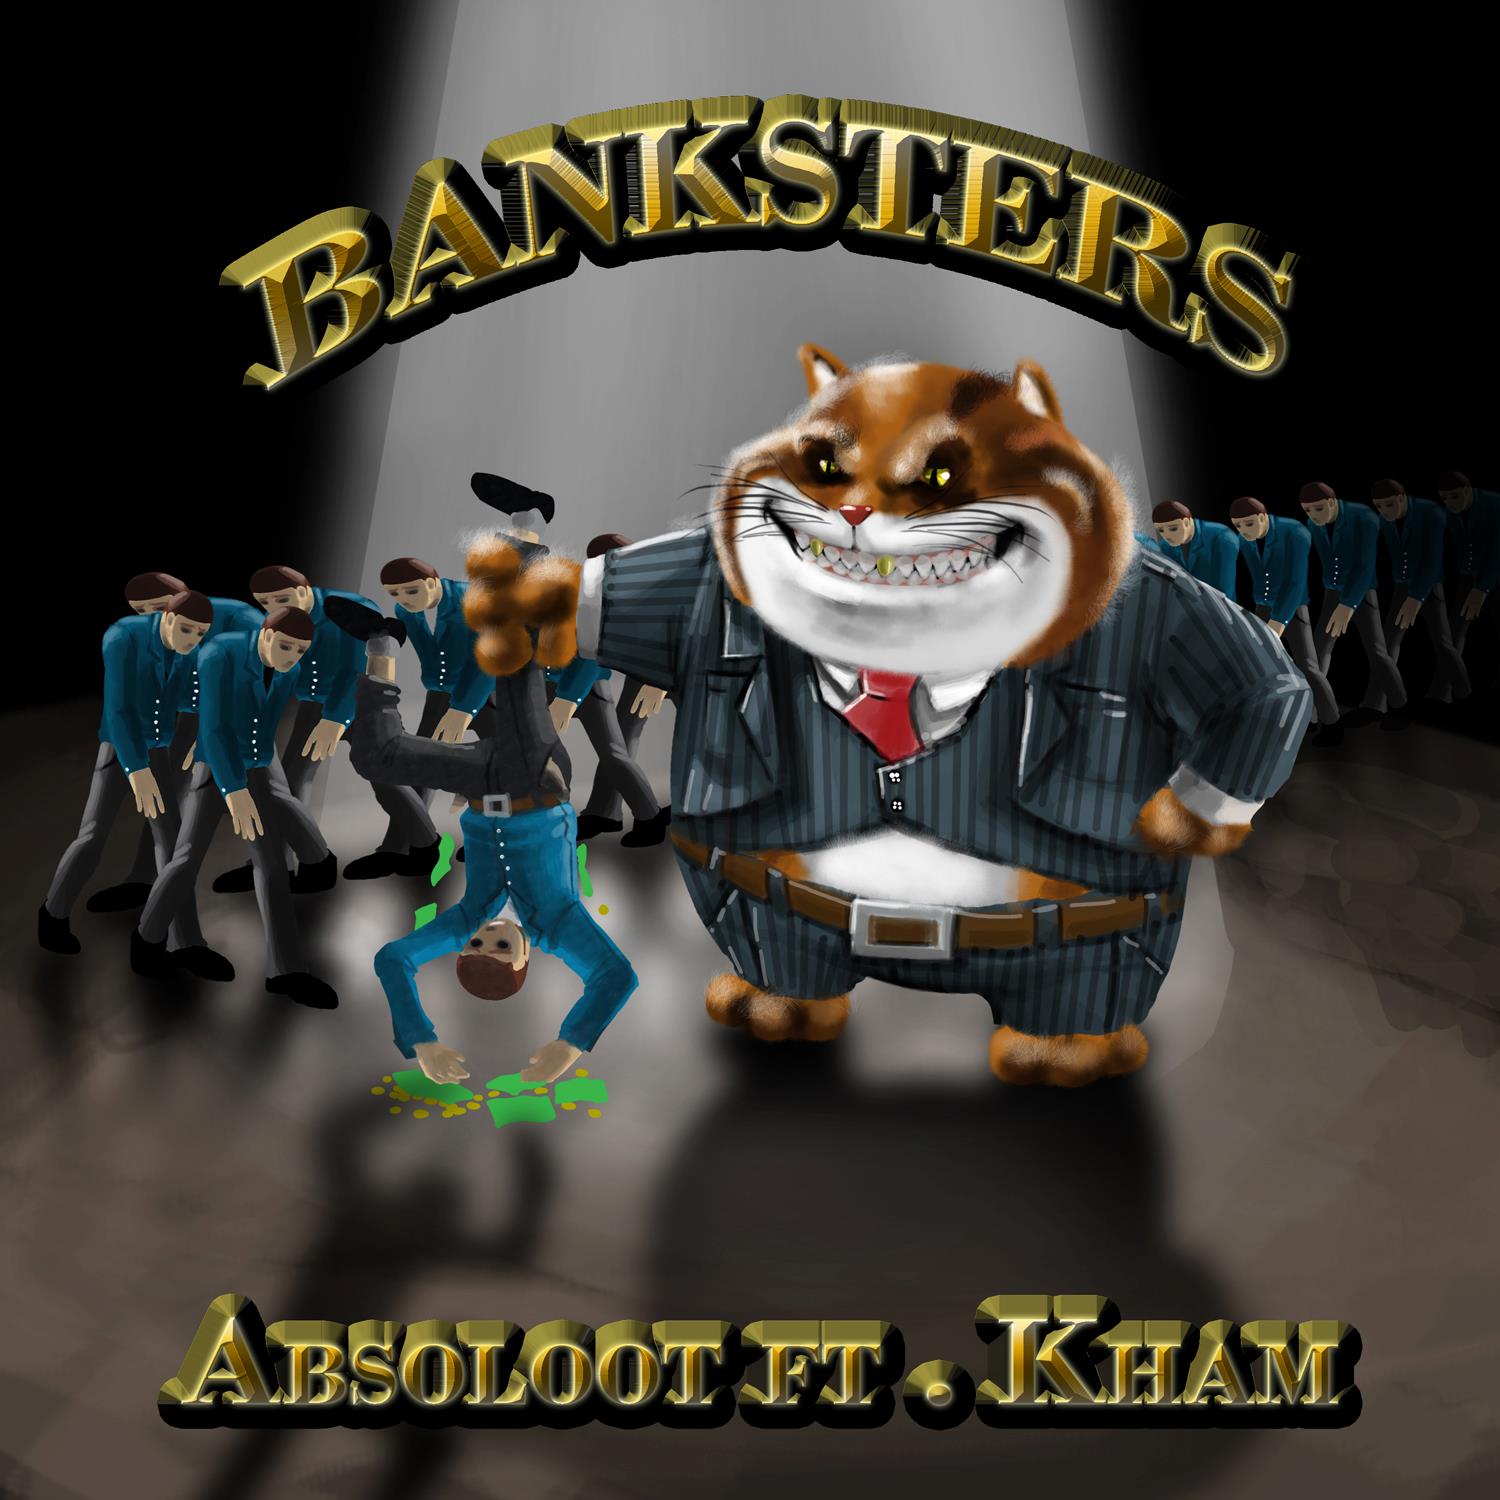  Absoloot – Banksters